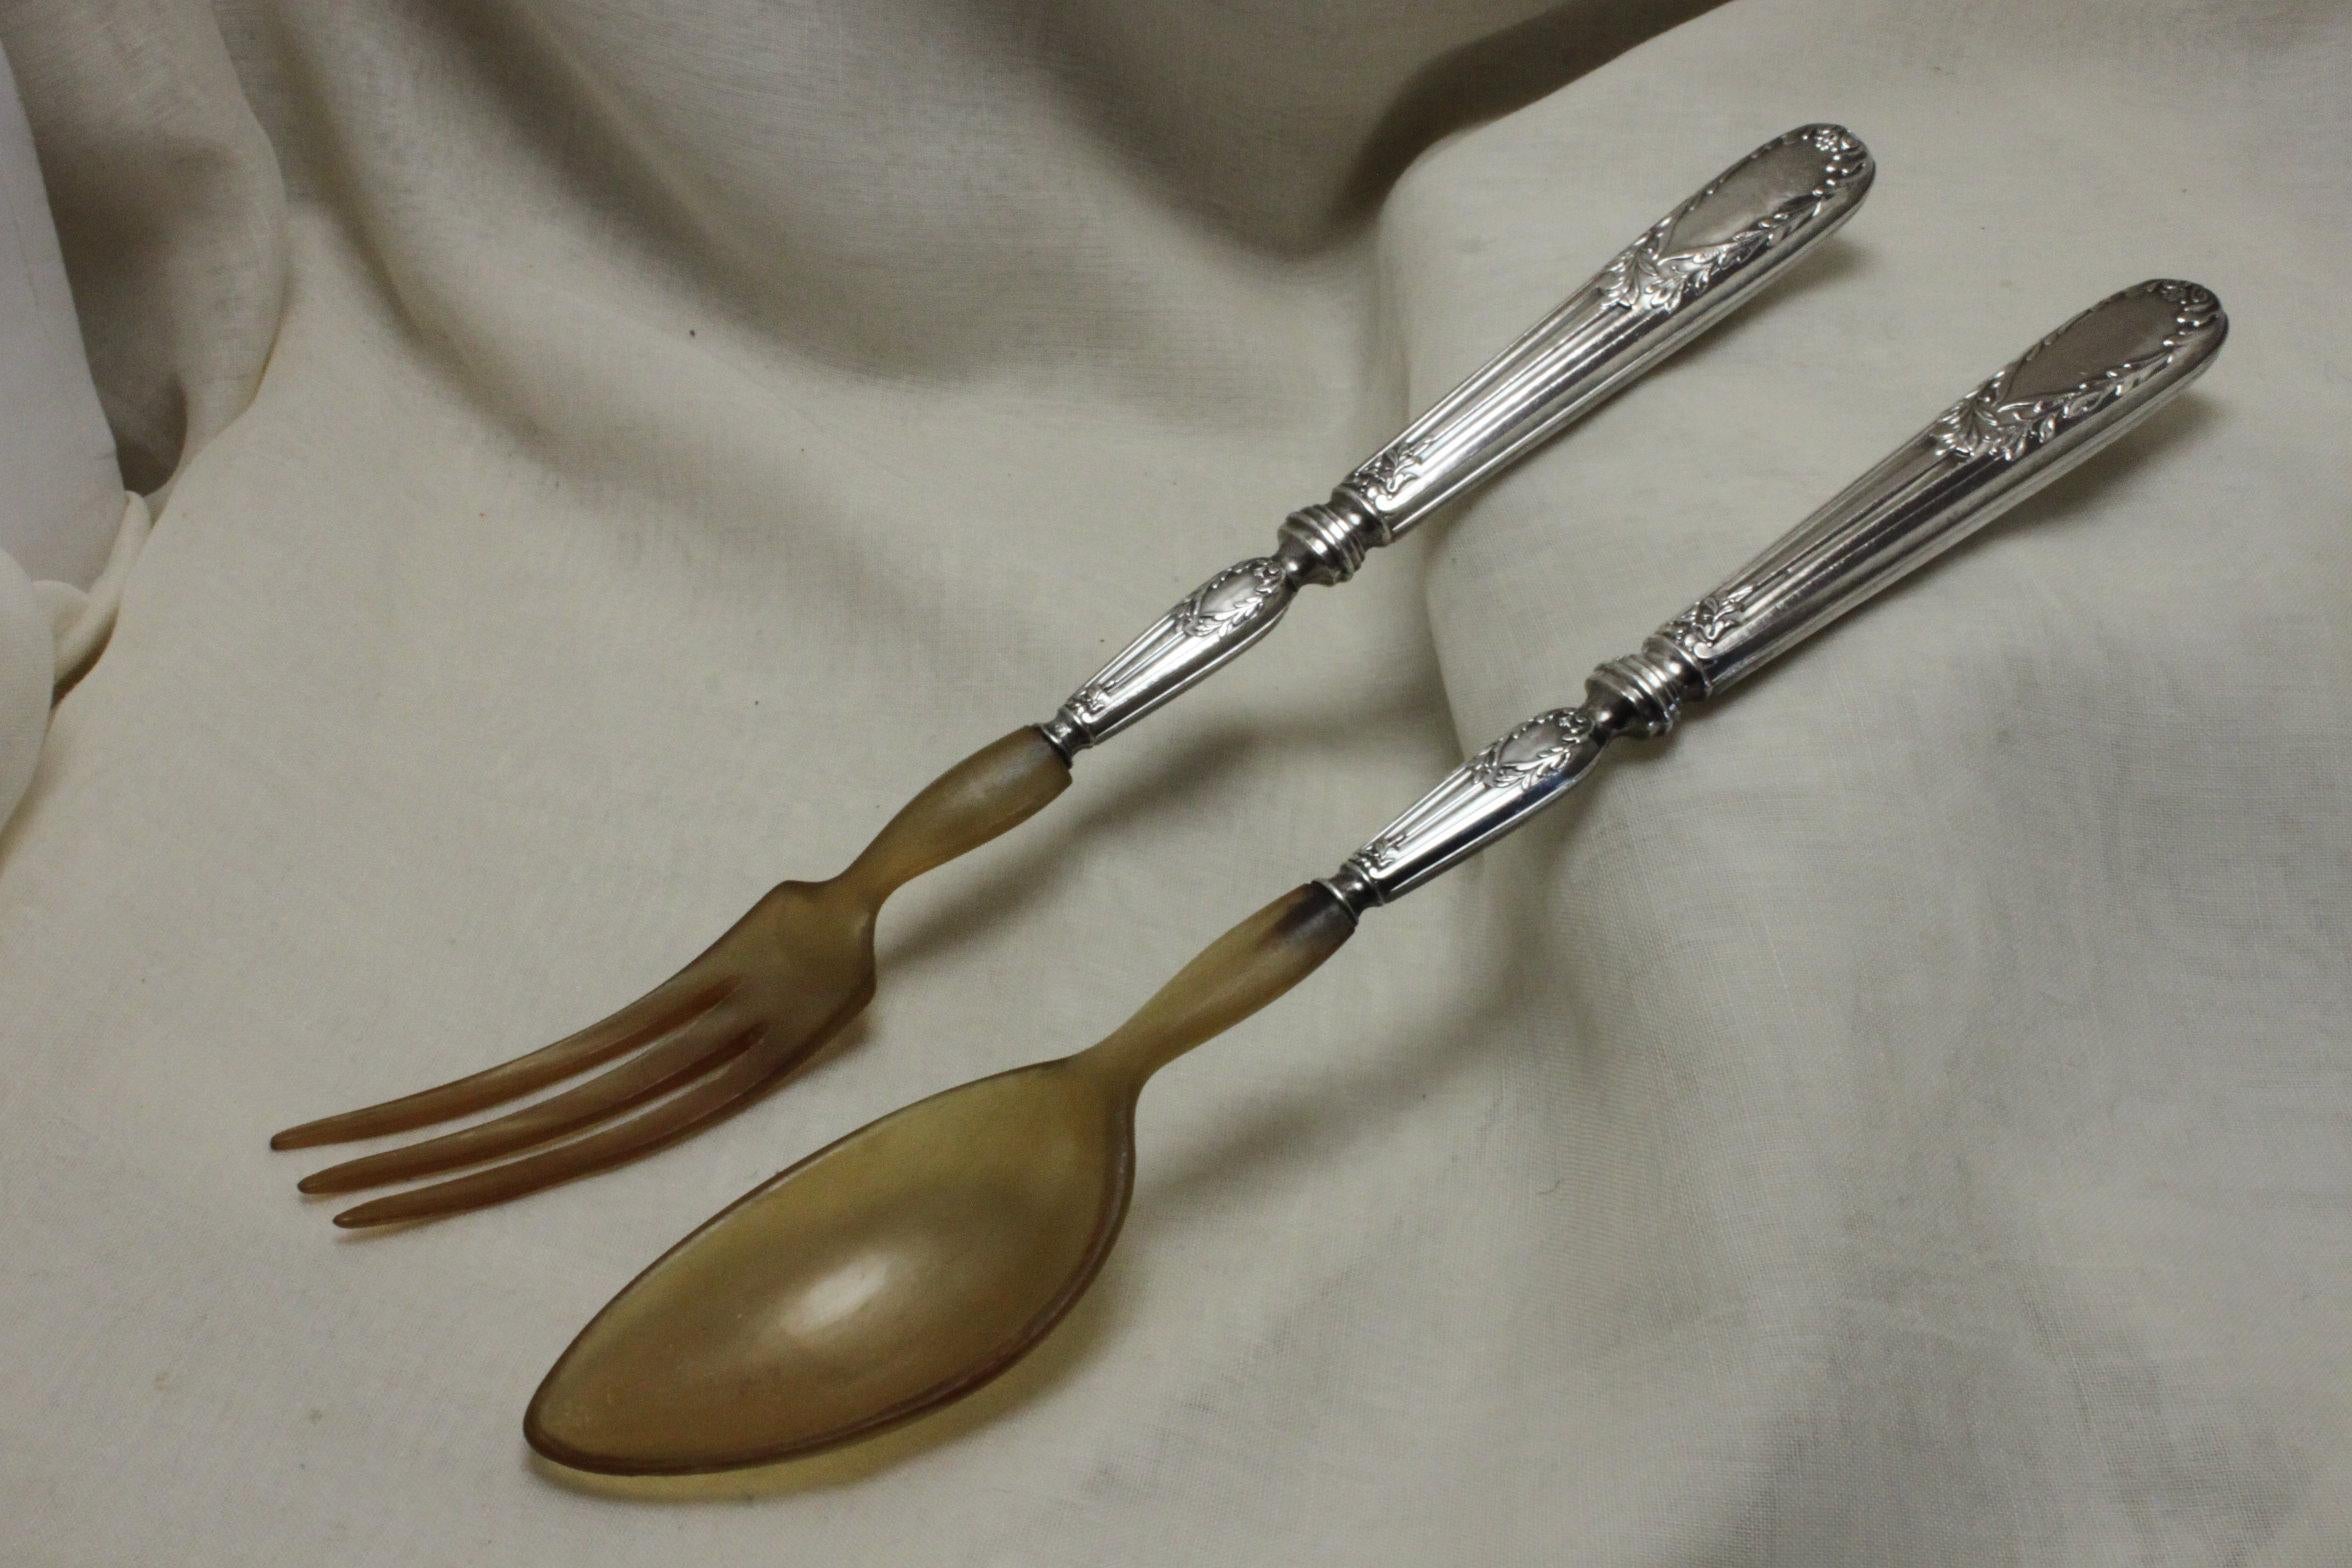 The handles of this pair of very attractive silver and horn salad servers are decorated with neo-classical laurel wreaths atop fluted, tapering columns, which contrast nicely to the plainness of the spoon and fork. The handles carry the mark 950M